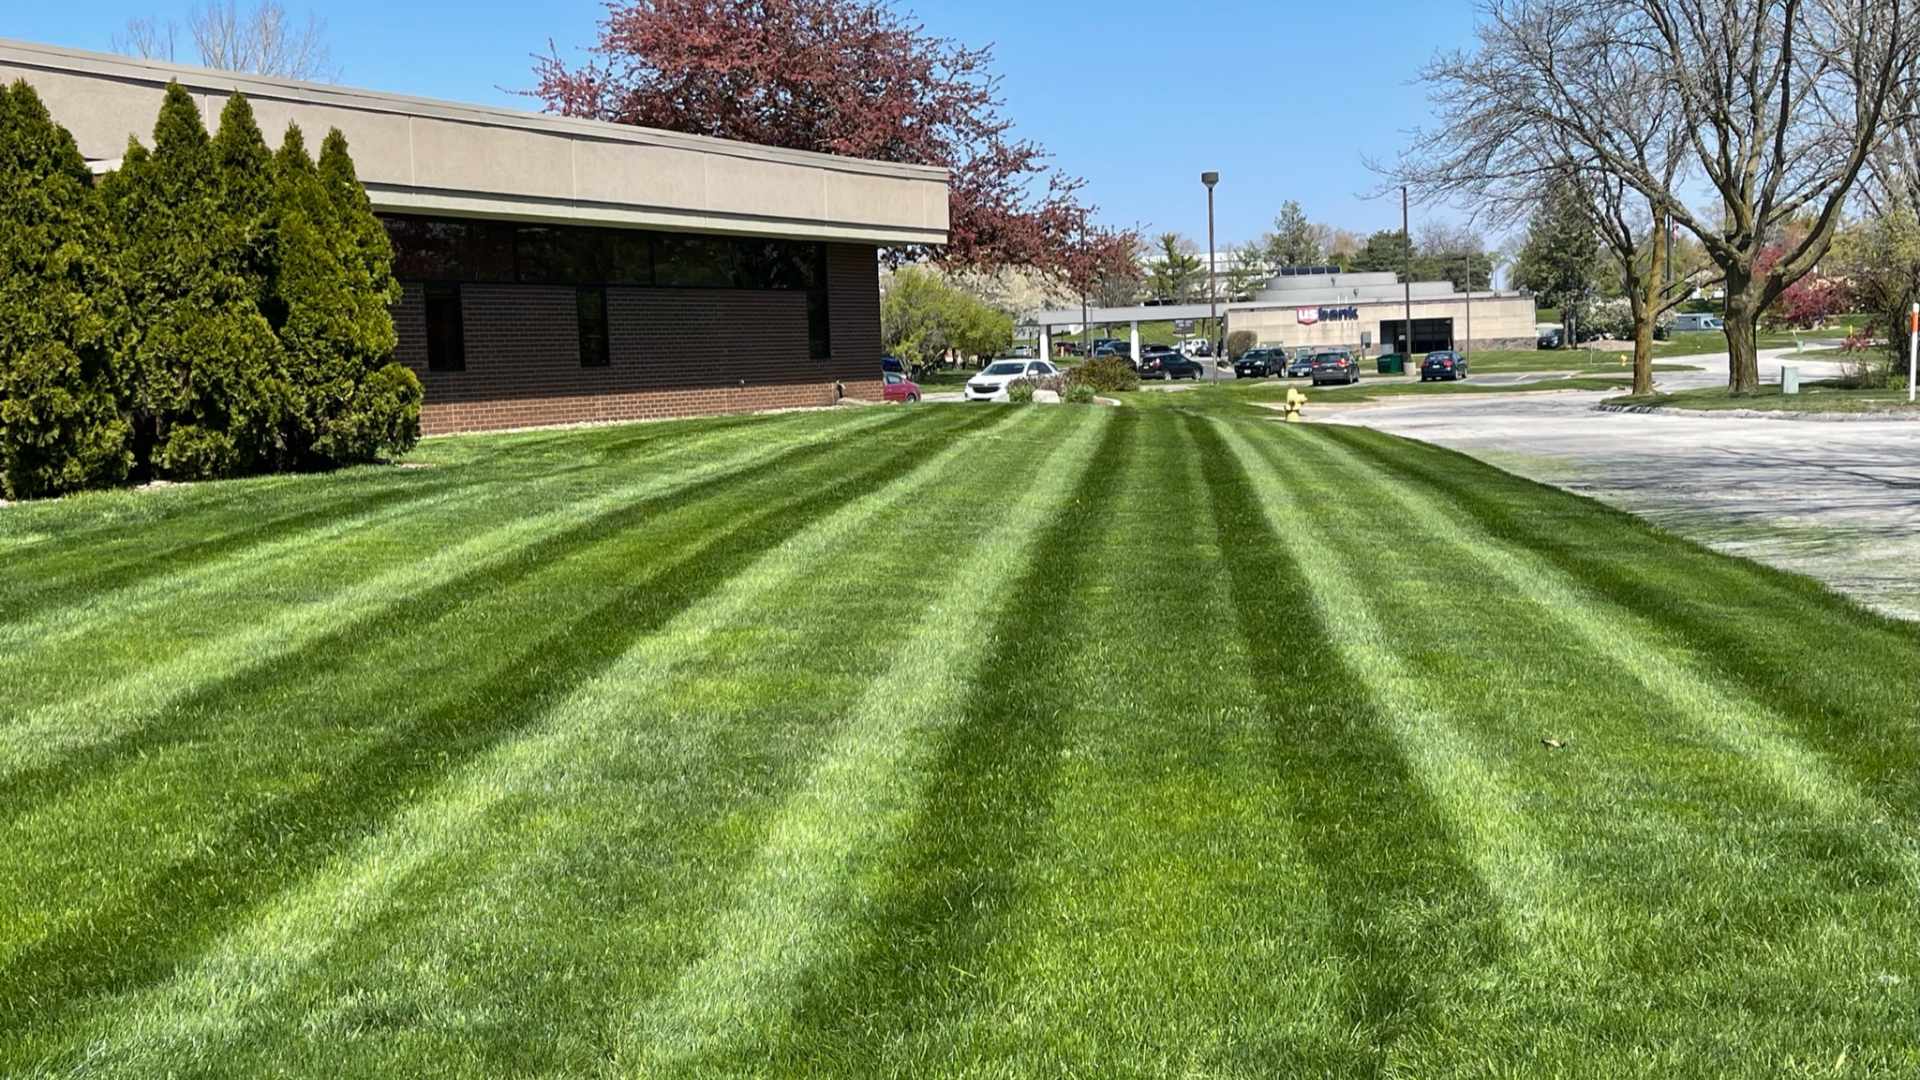 Commercial property with freshly mowed lawn in Urbandale, IA.